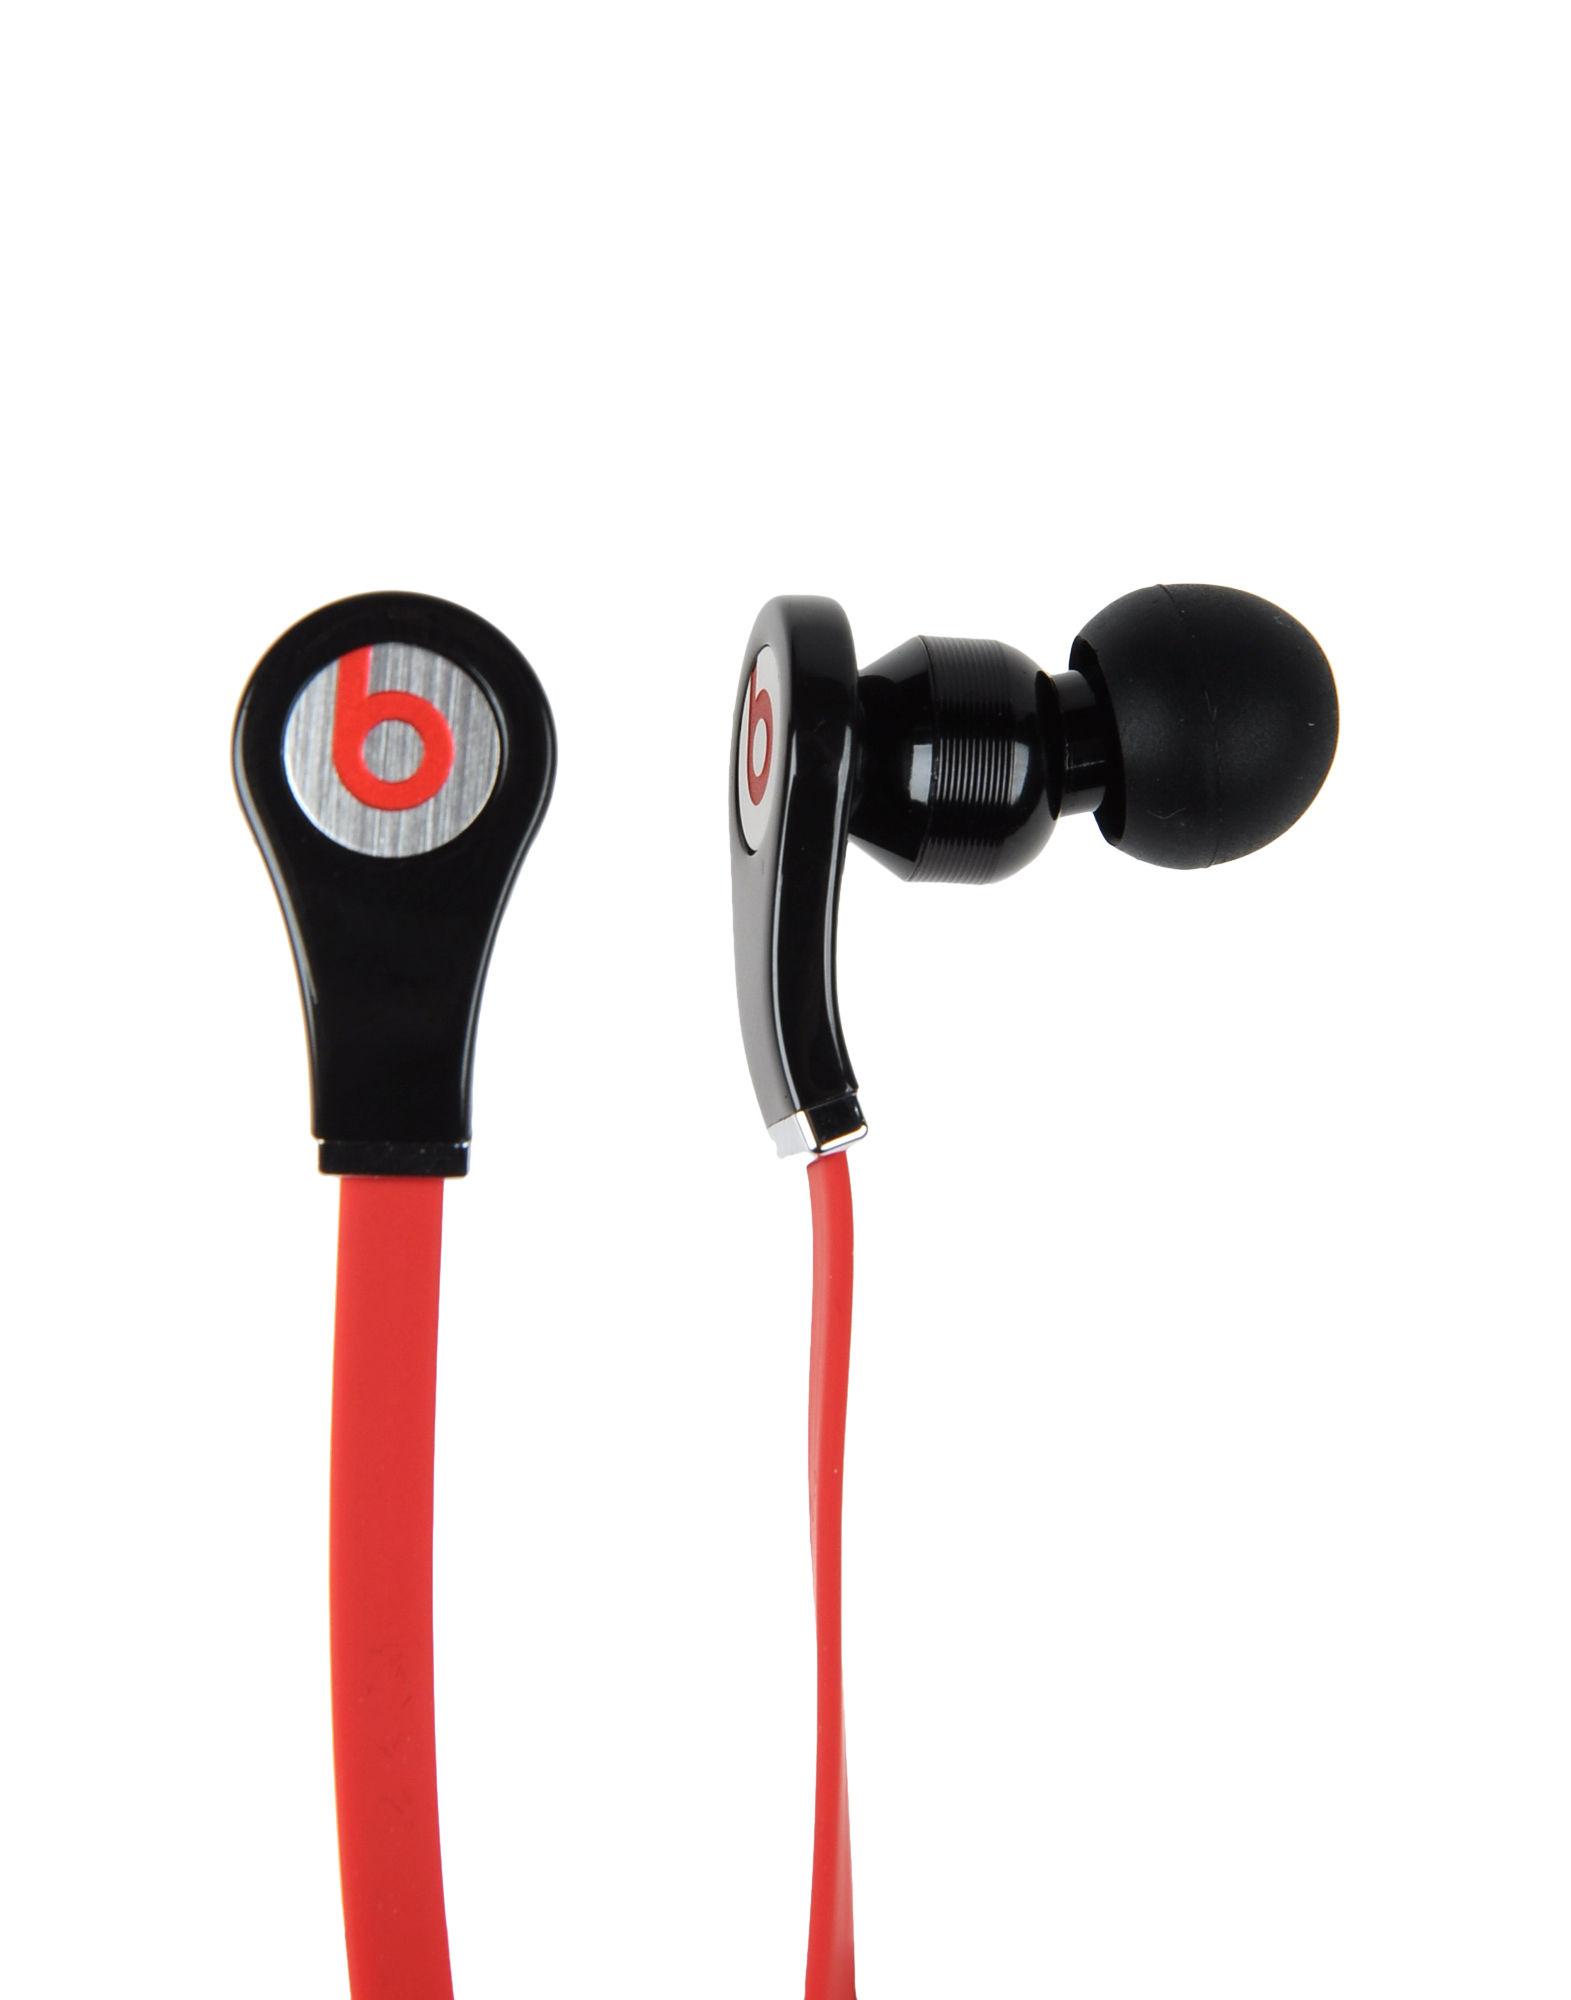 Foto beats by dr.dre auriculares
